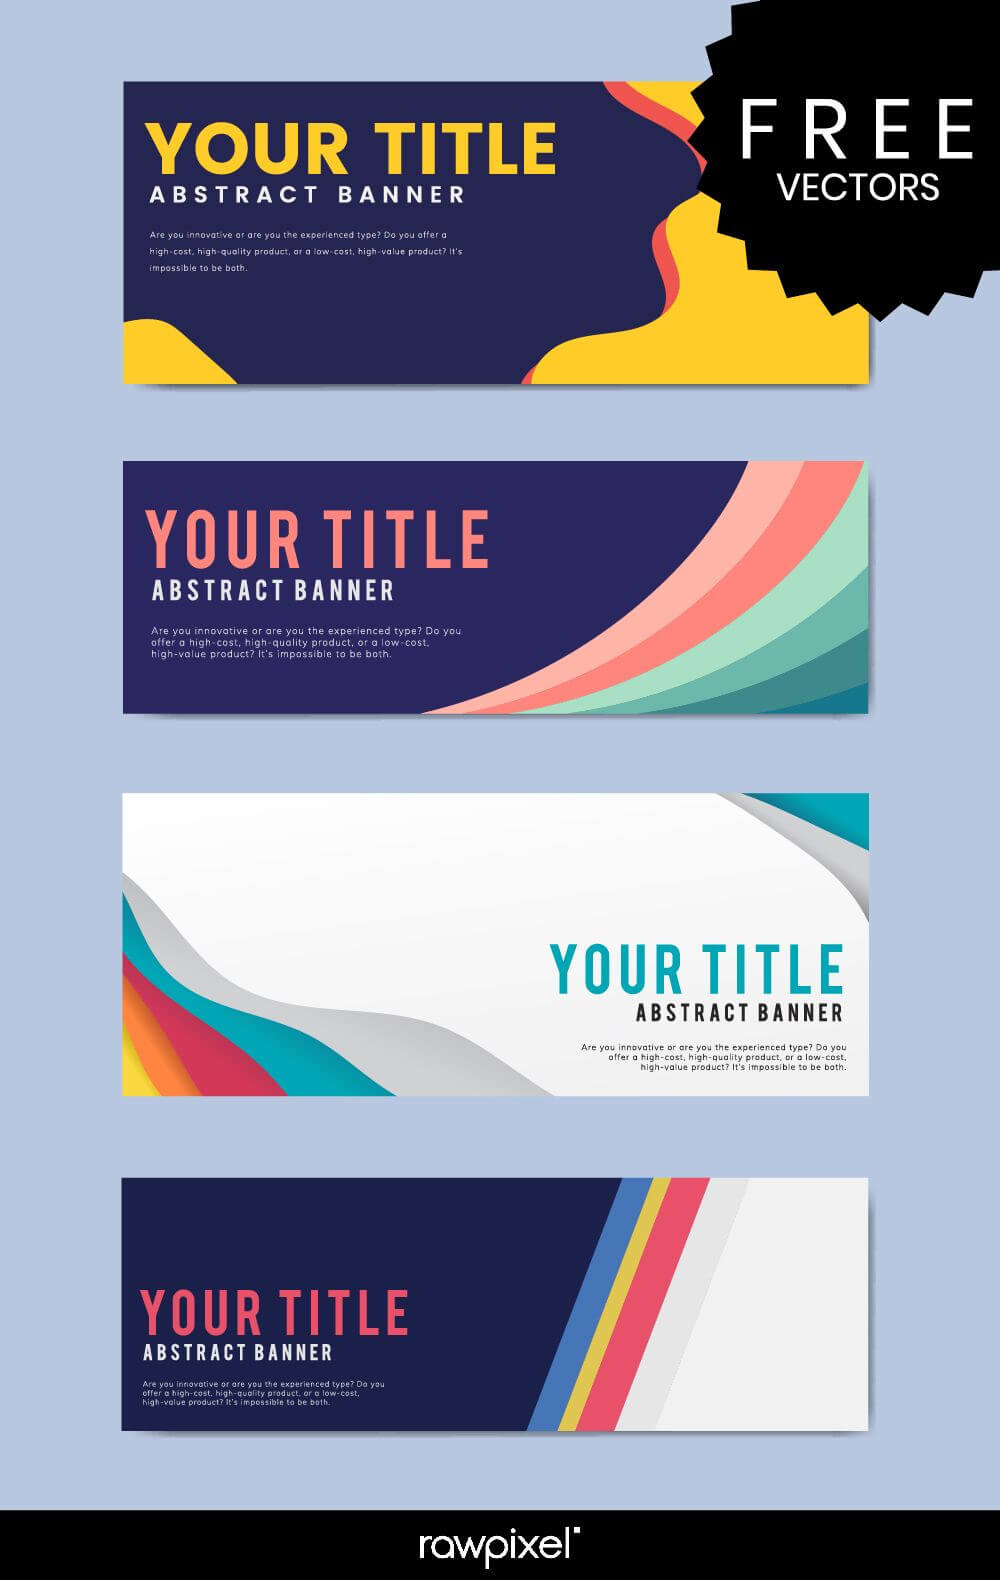 Download Free Modern Business Banner Templates At Rawpixel For Website Banner Templates Free Download